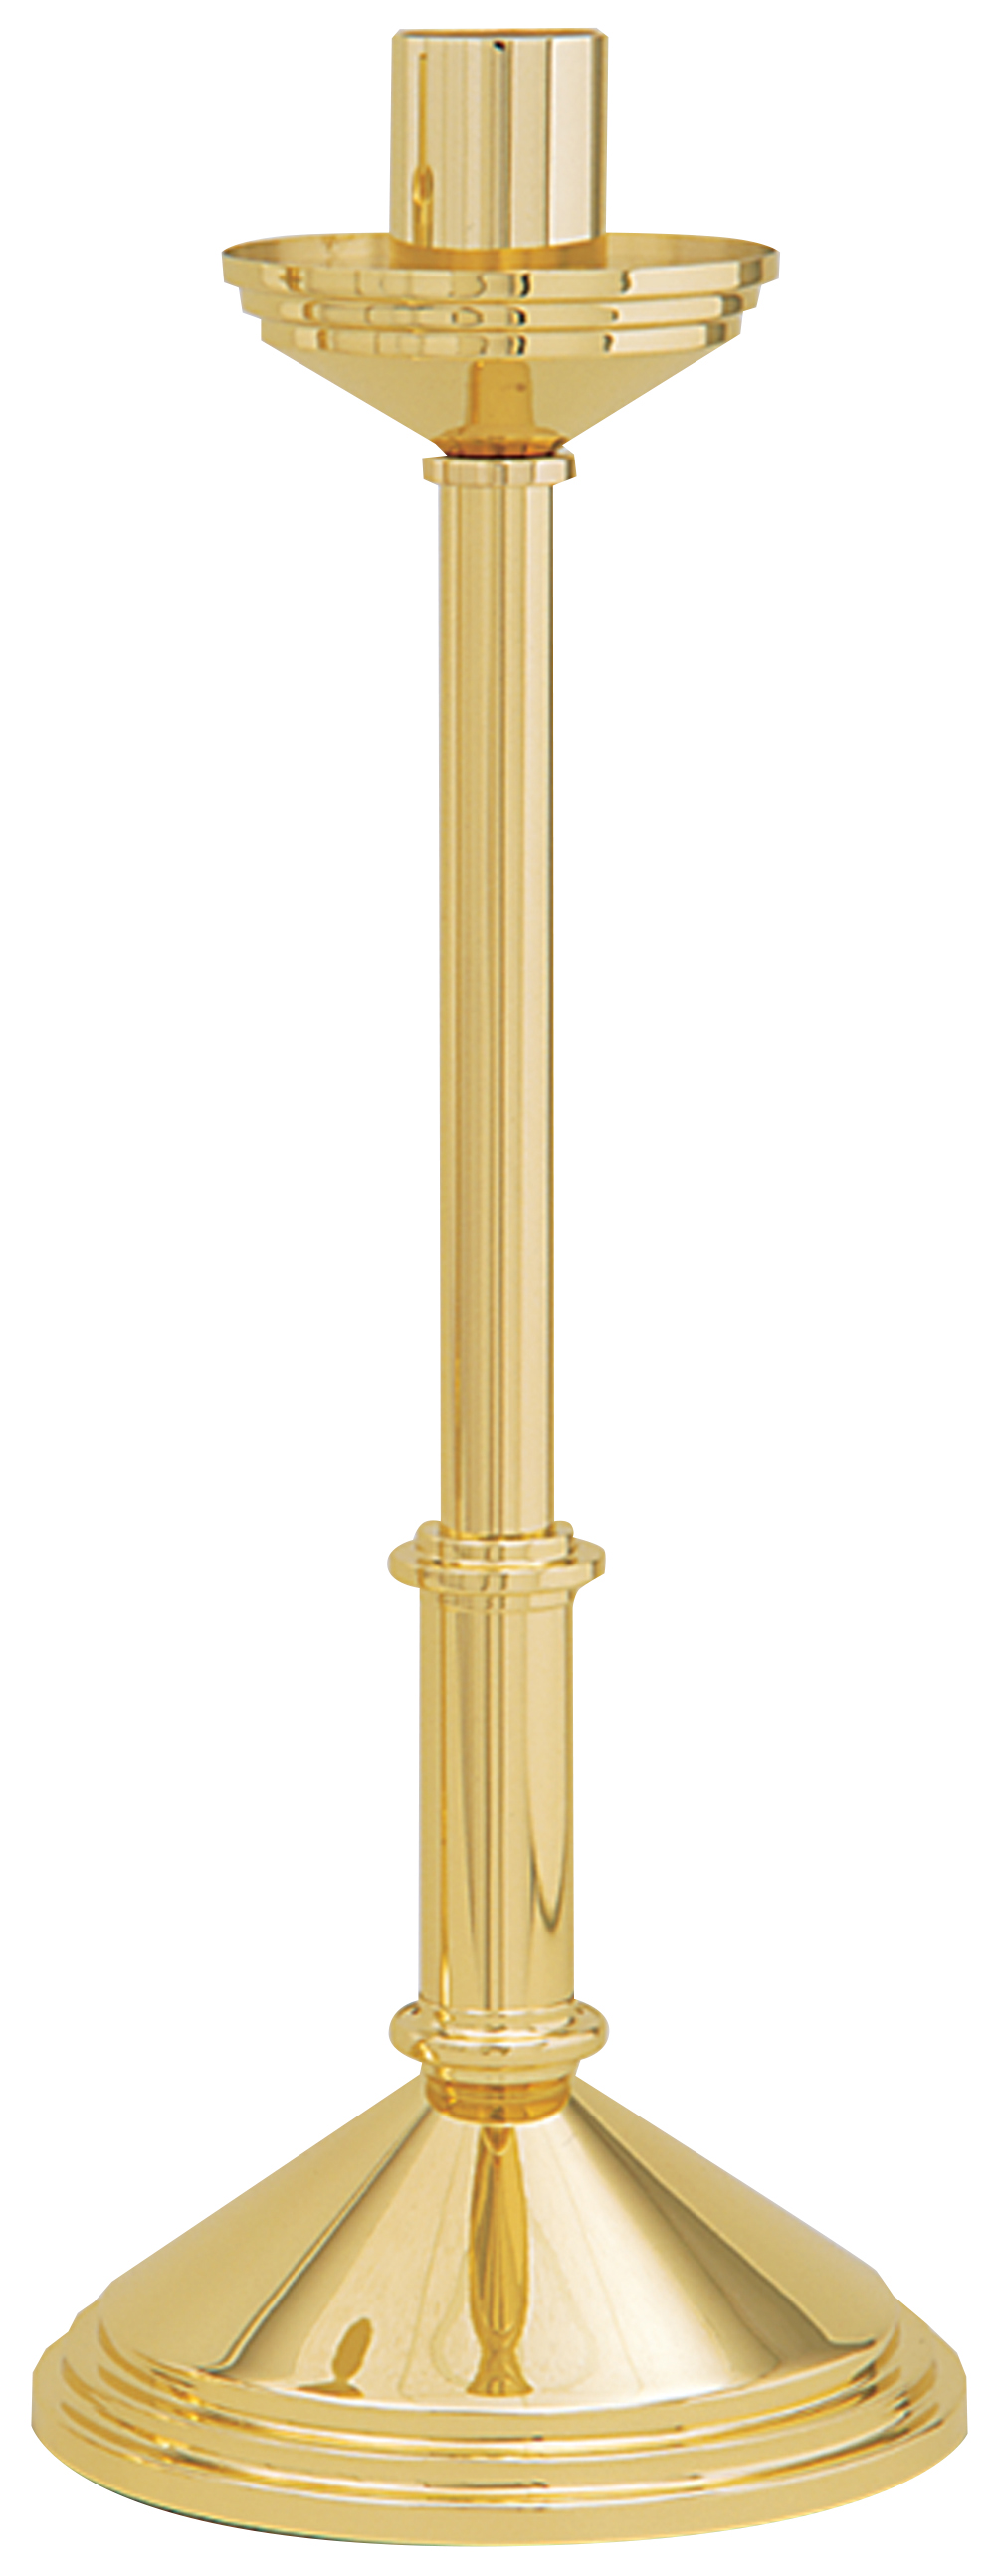 Paschal Candlestick 28 inch 2 1/2 inch Socket